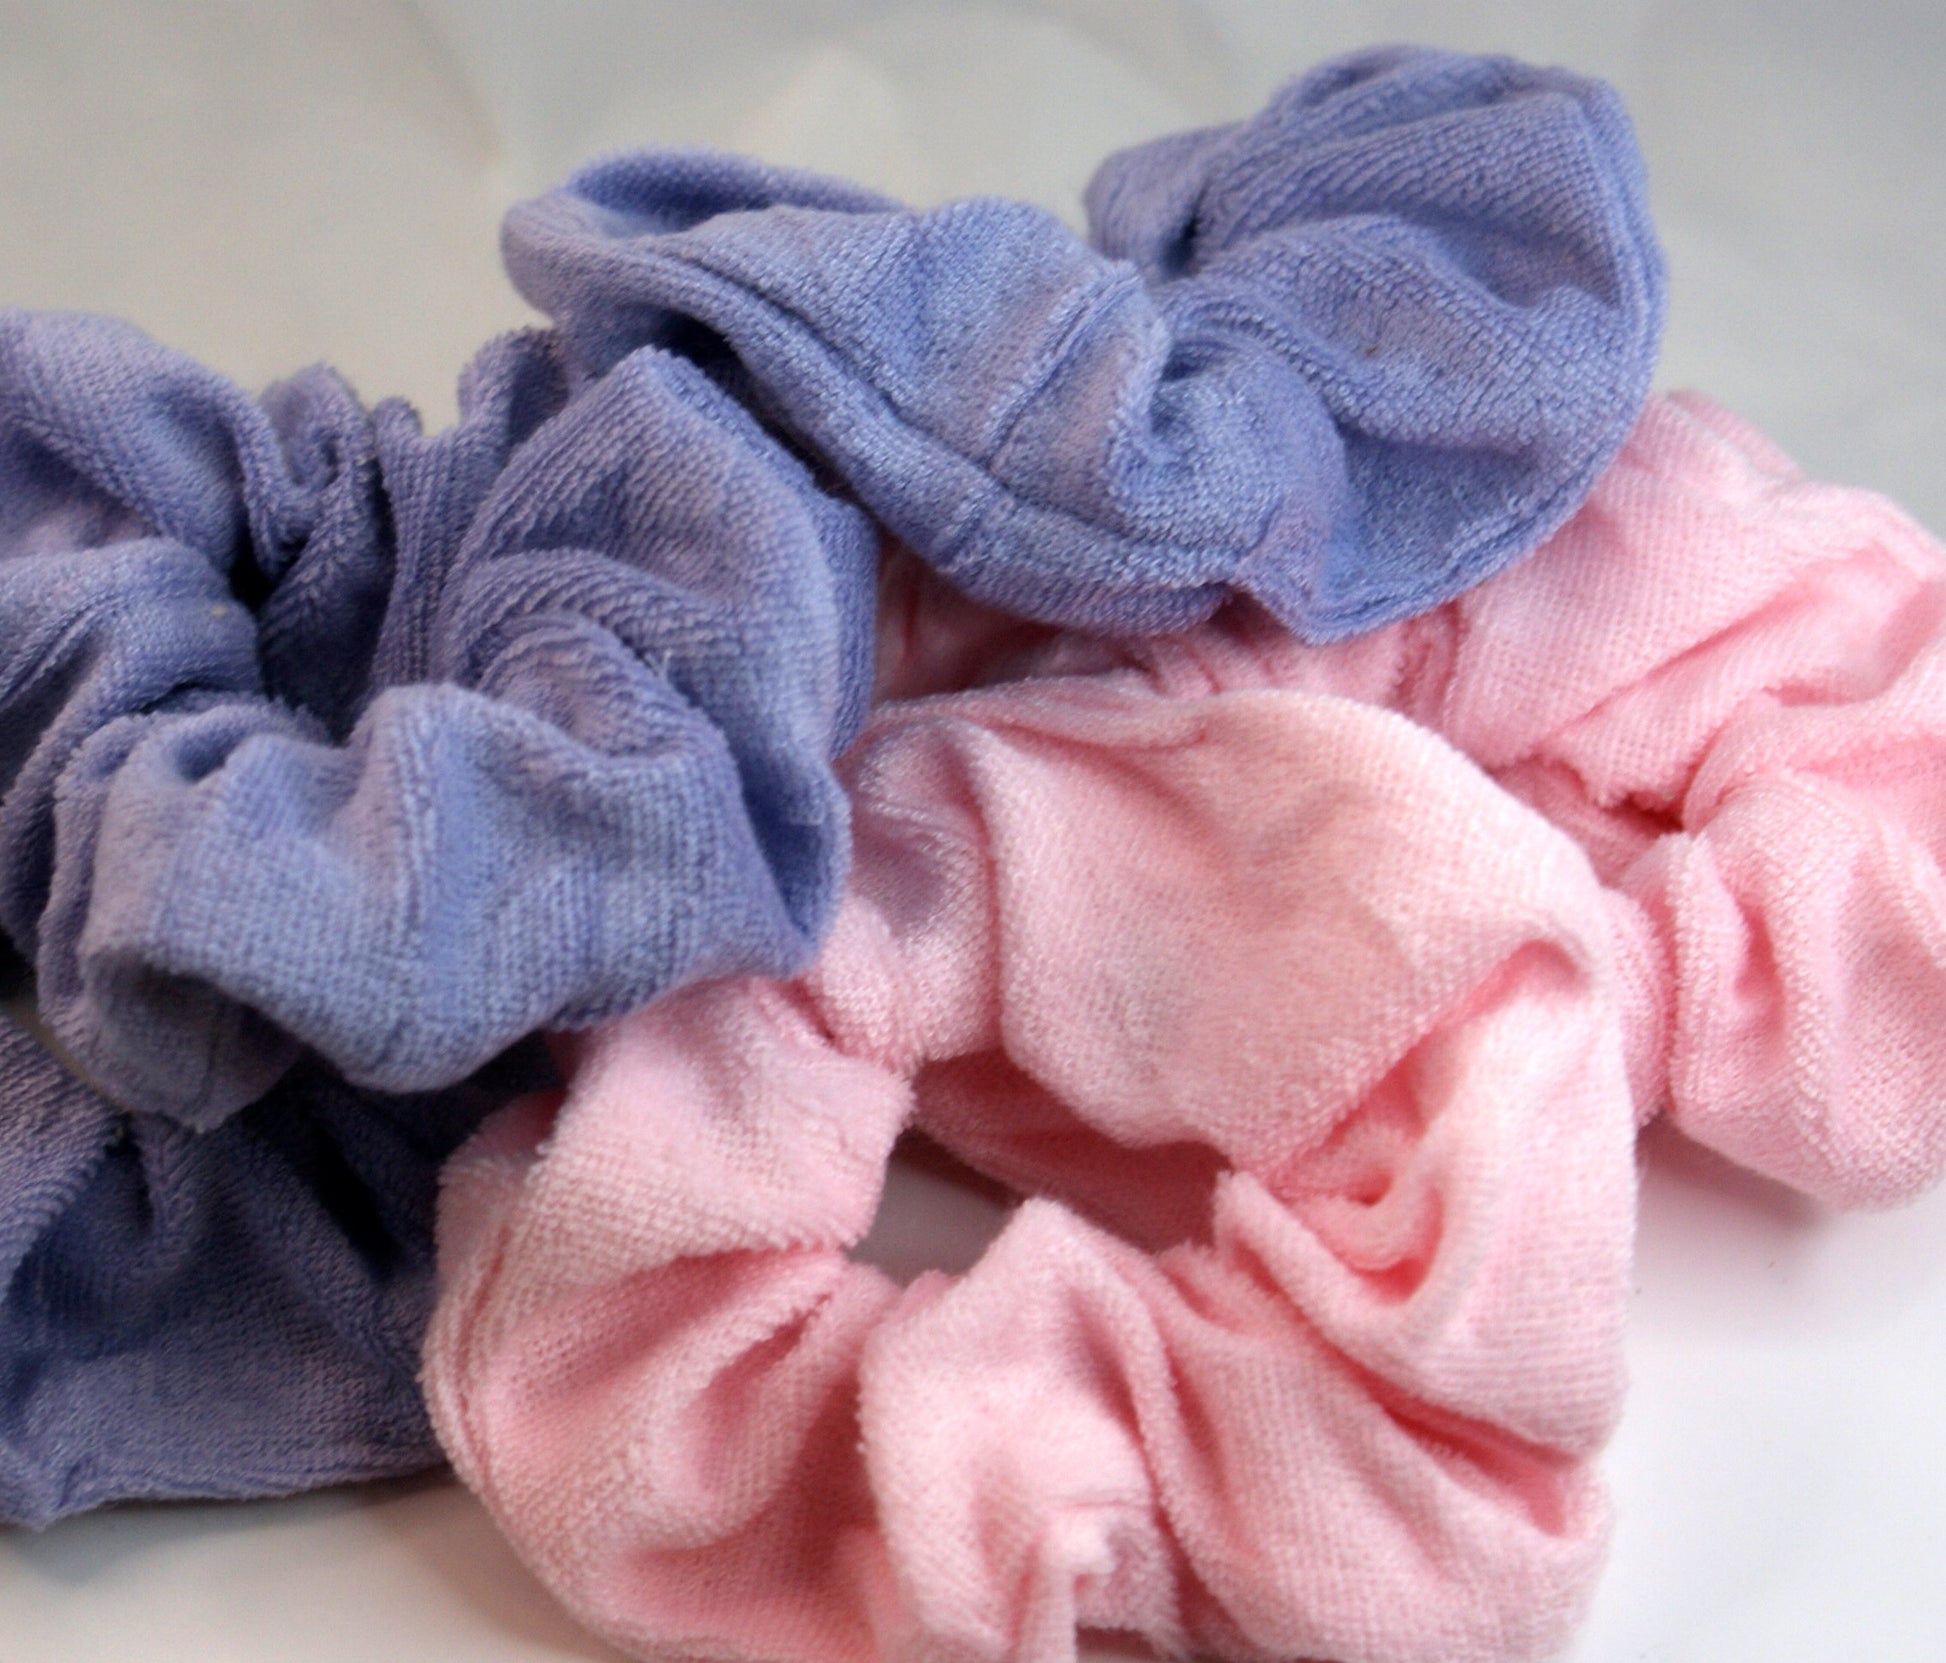 Made from microfiber material, these towel scrunchies are incredibly absorbent.